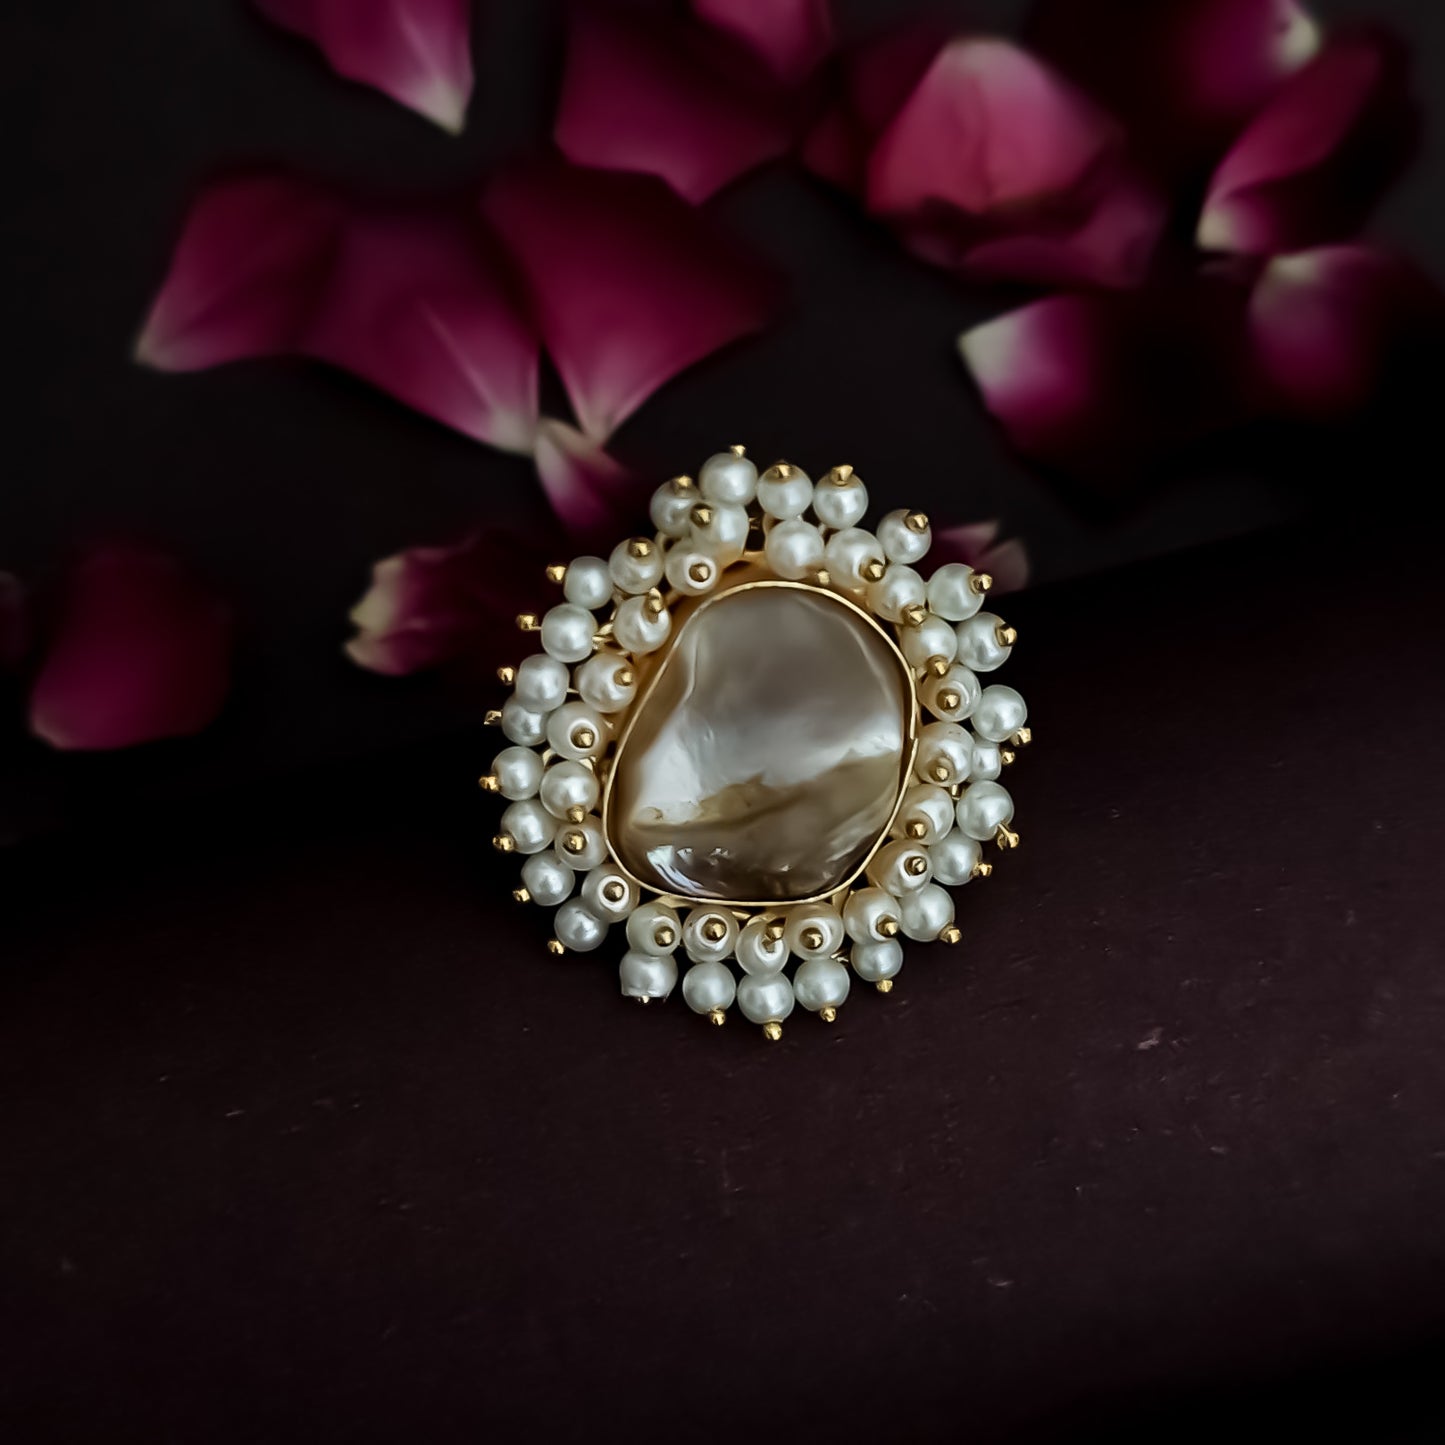 Uncut Mother of Pearls (MOP) Handcrafted Brass Adjustable Ring